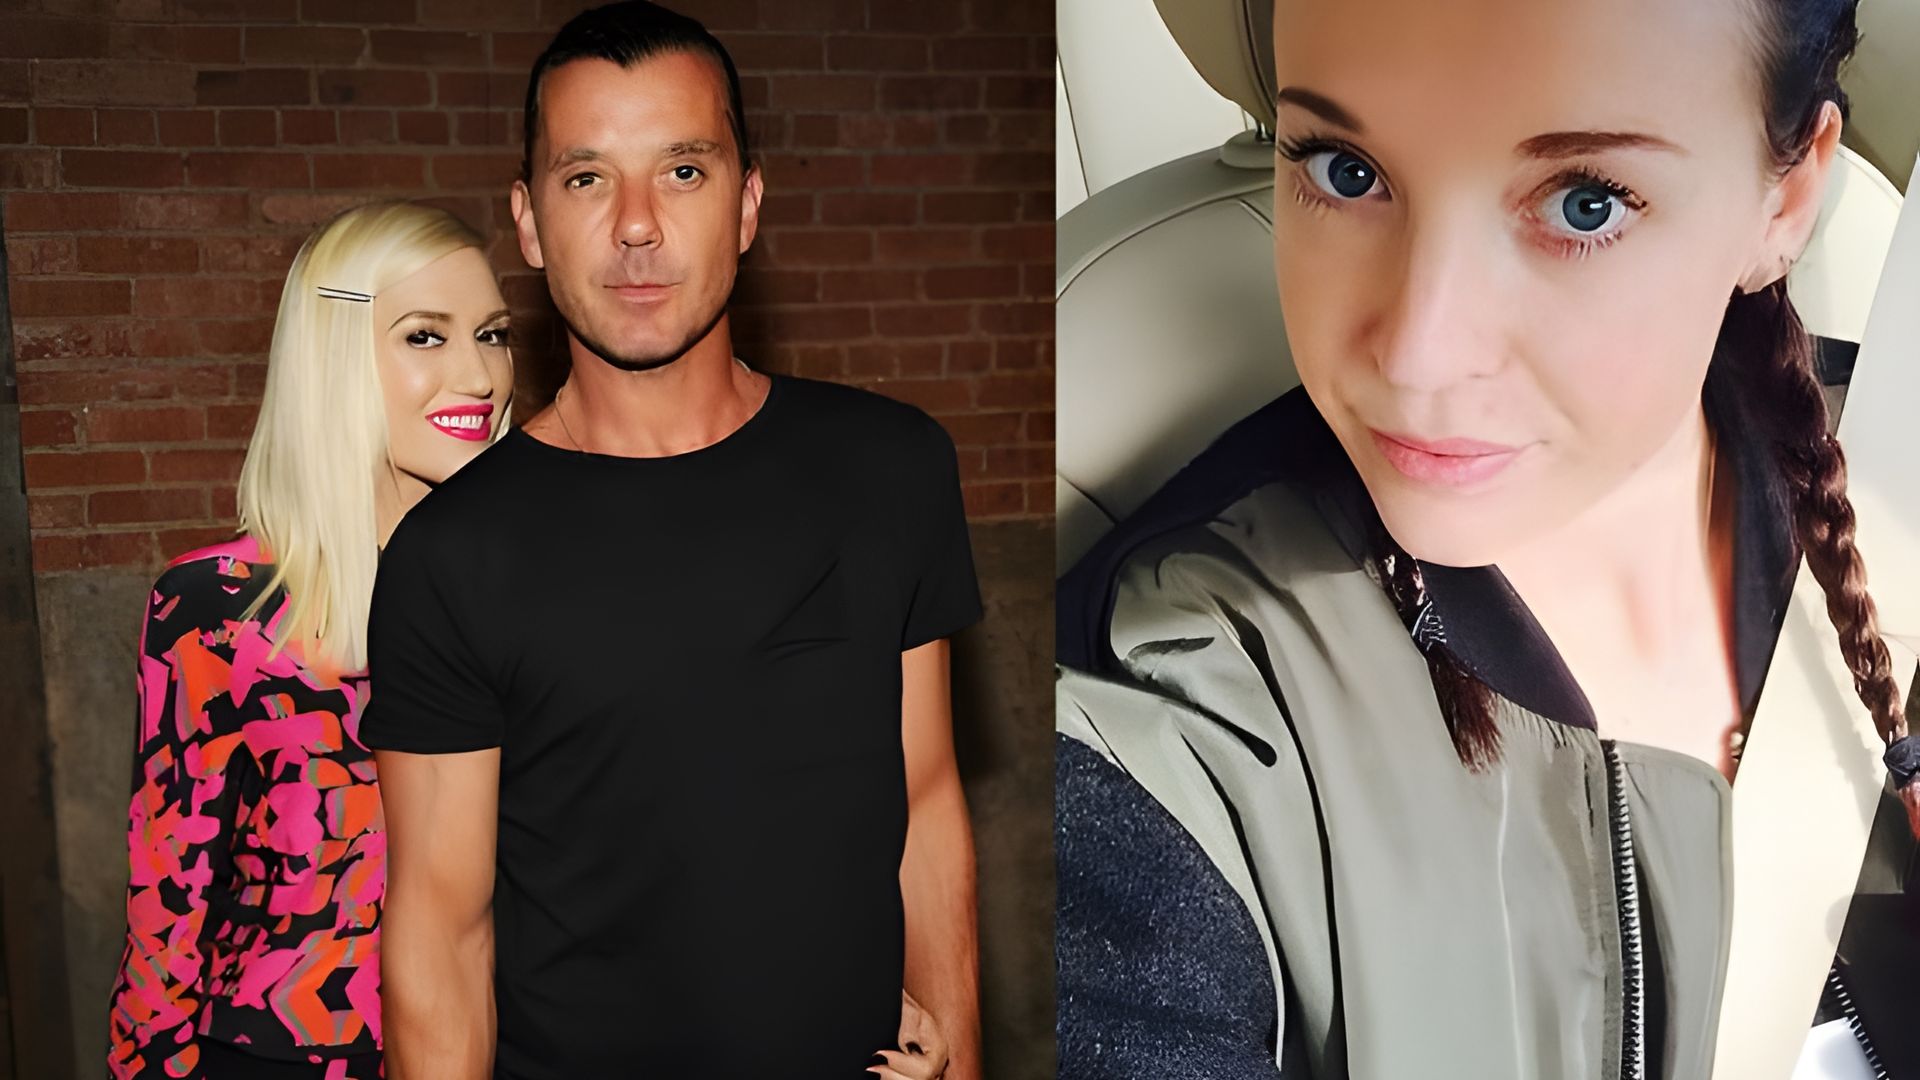 Gwen Stefani's husband was involved with the nanny